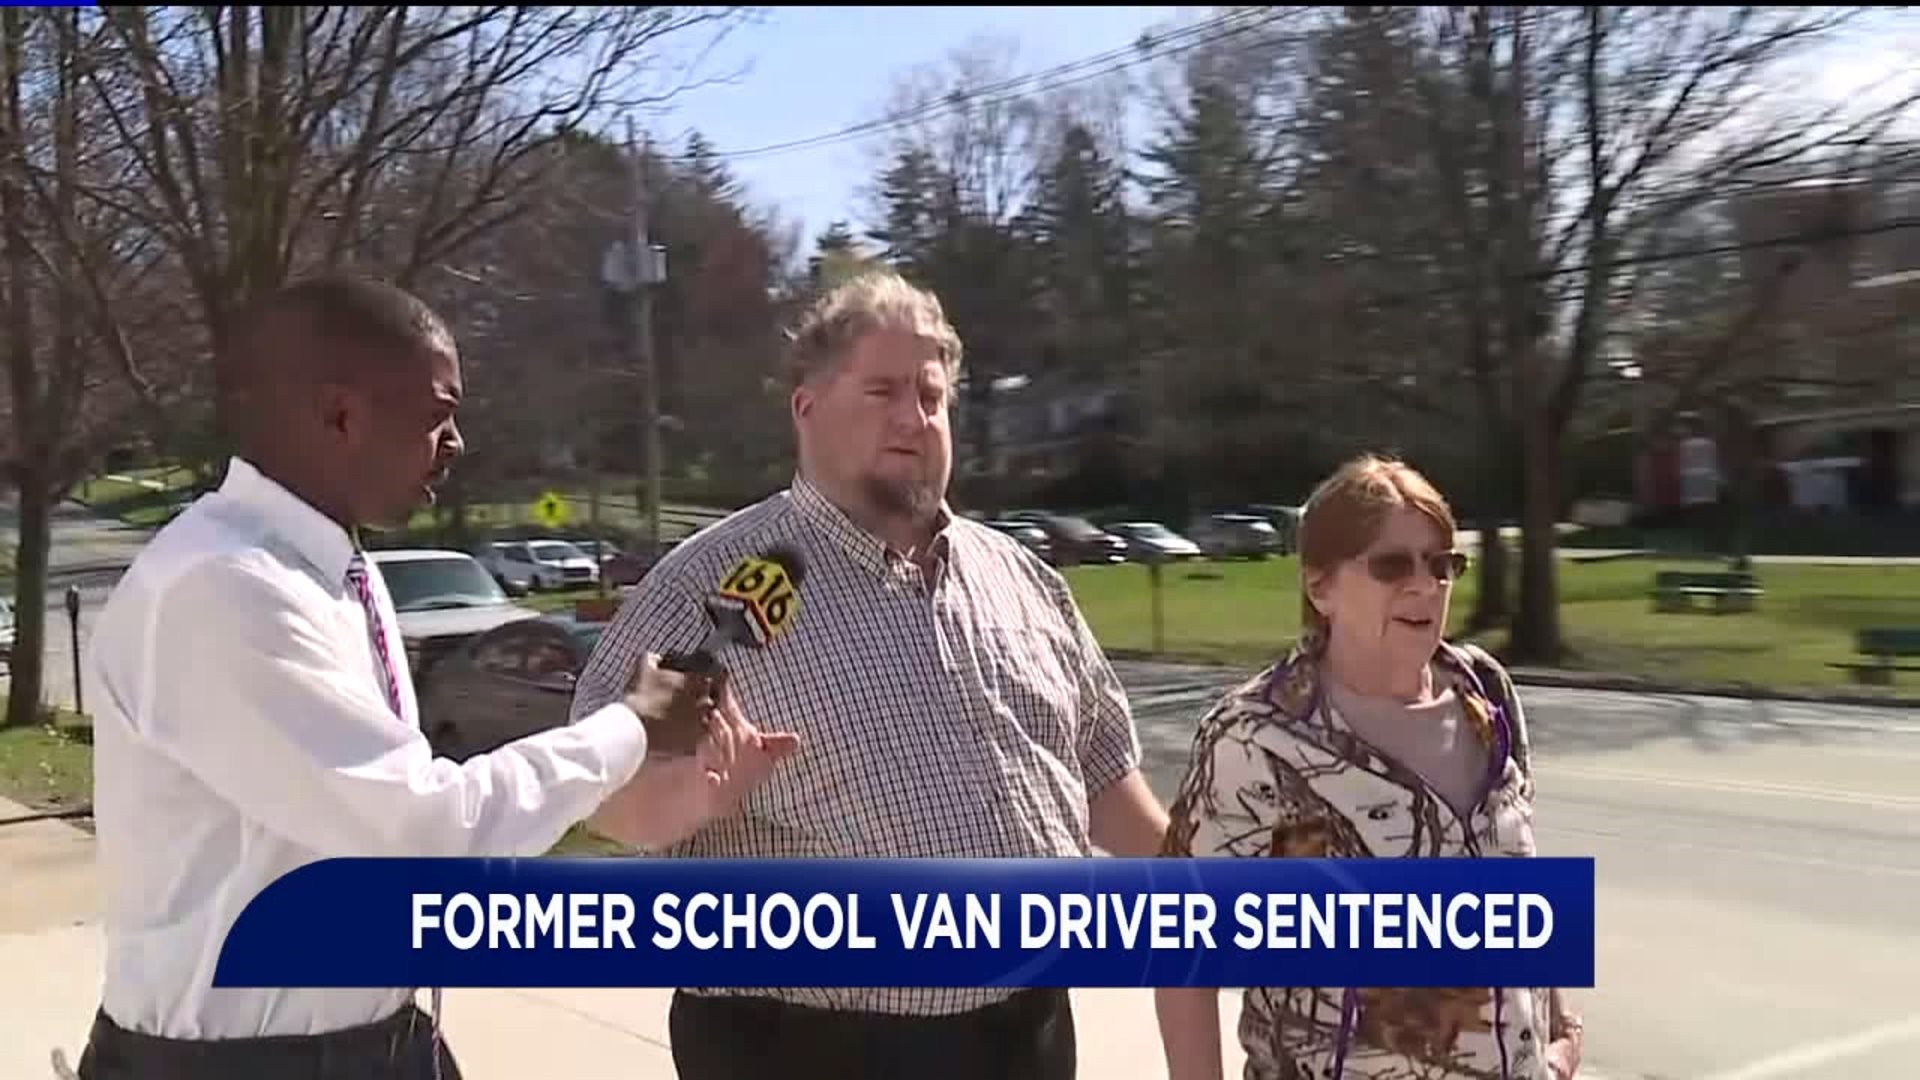 No Jail Time for School Driver Accused of Improper Contact with Teen